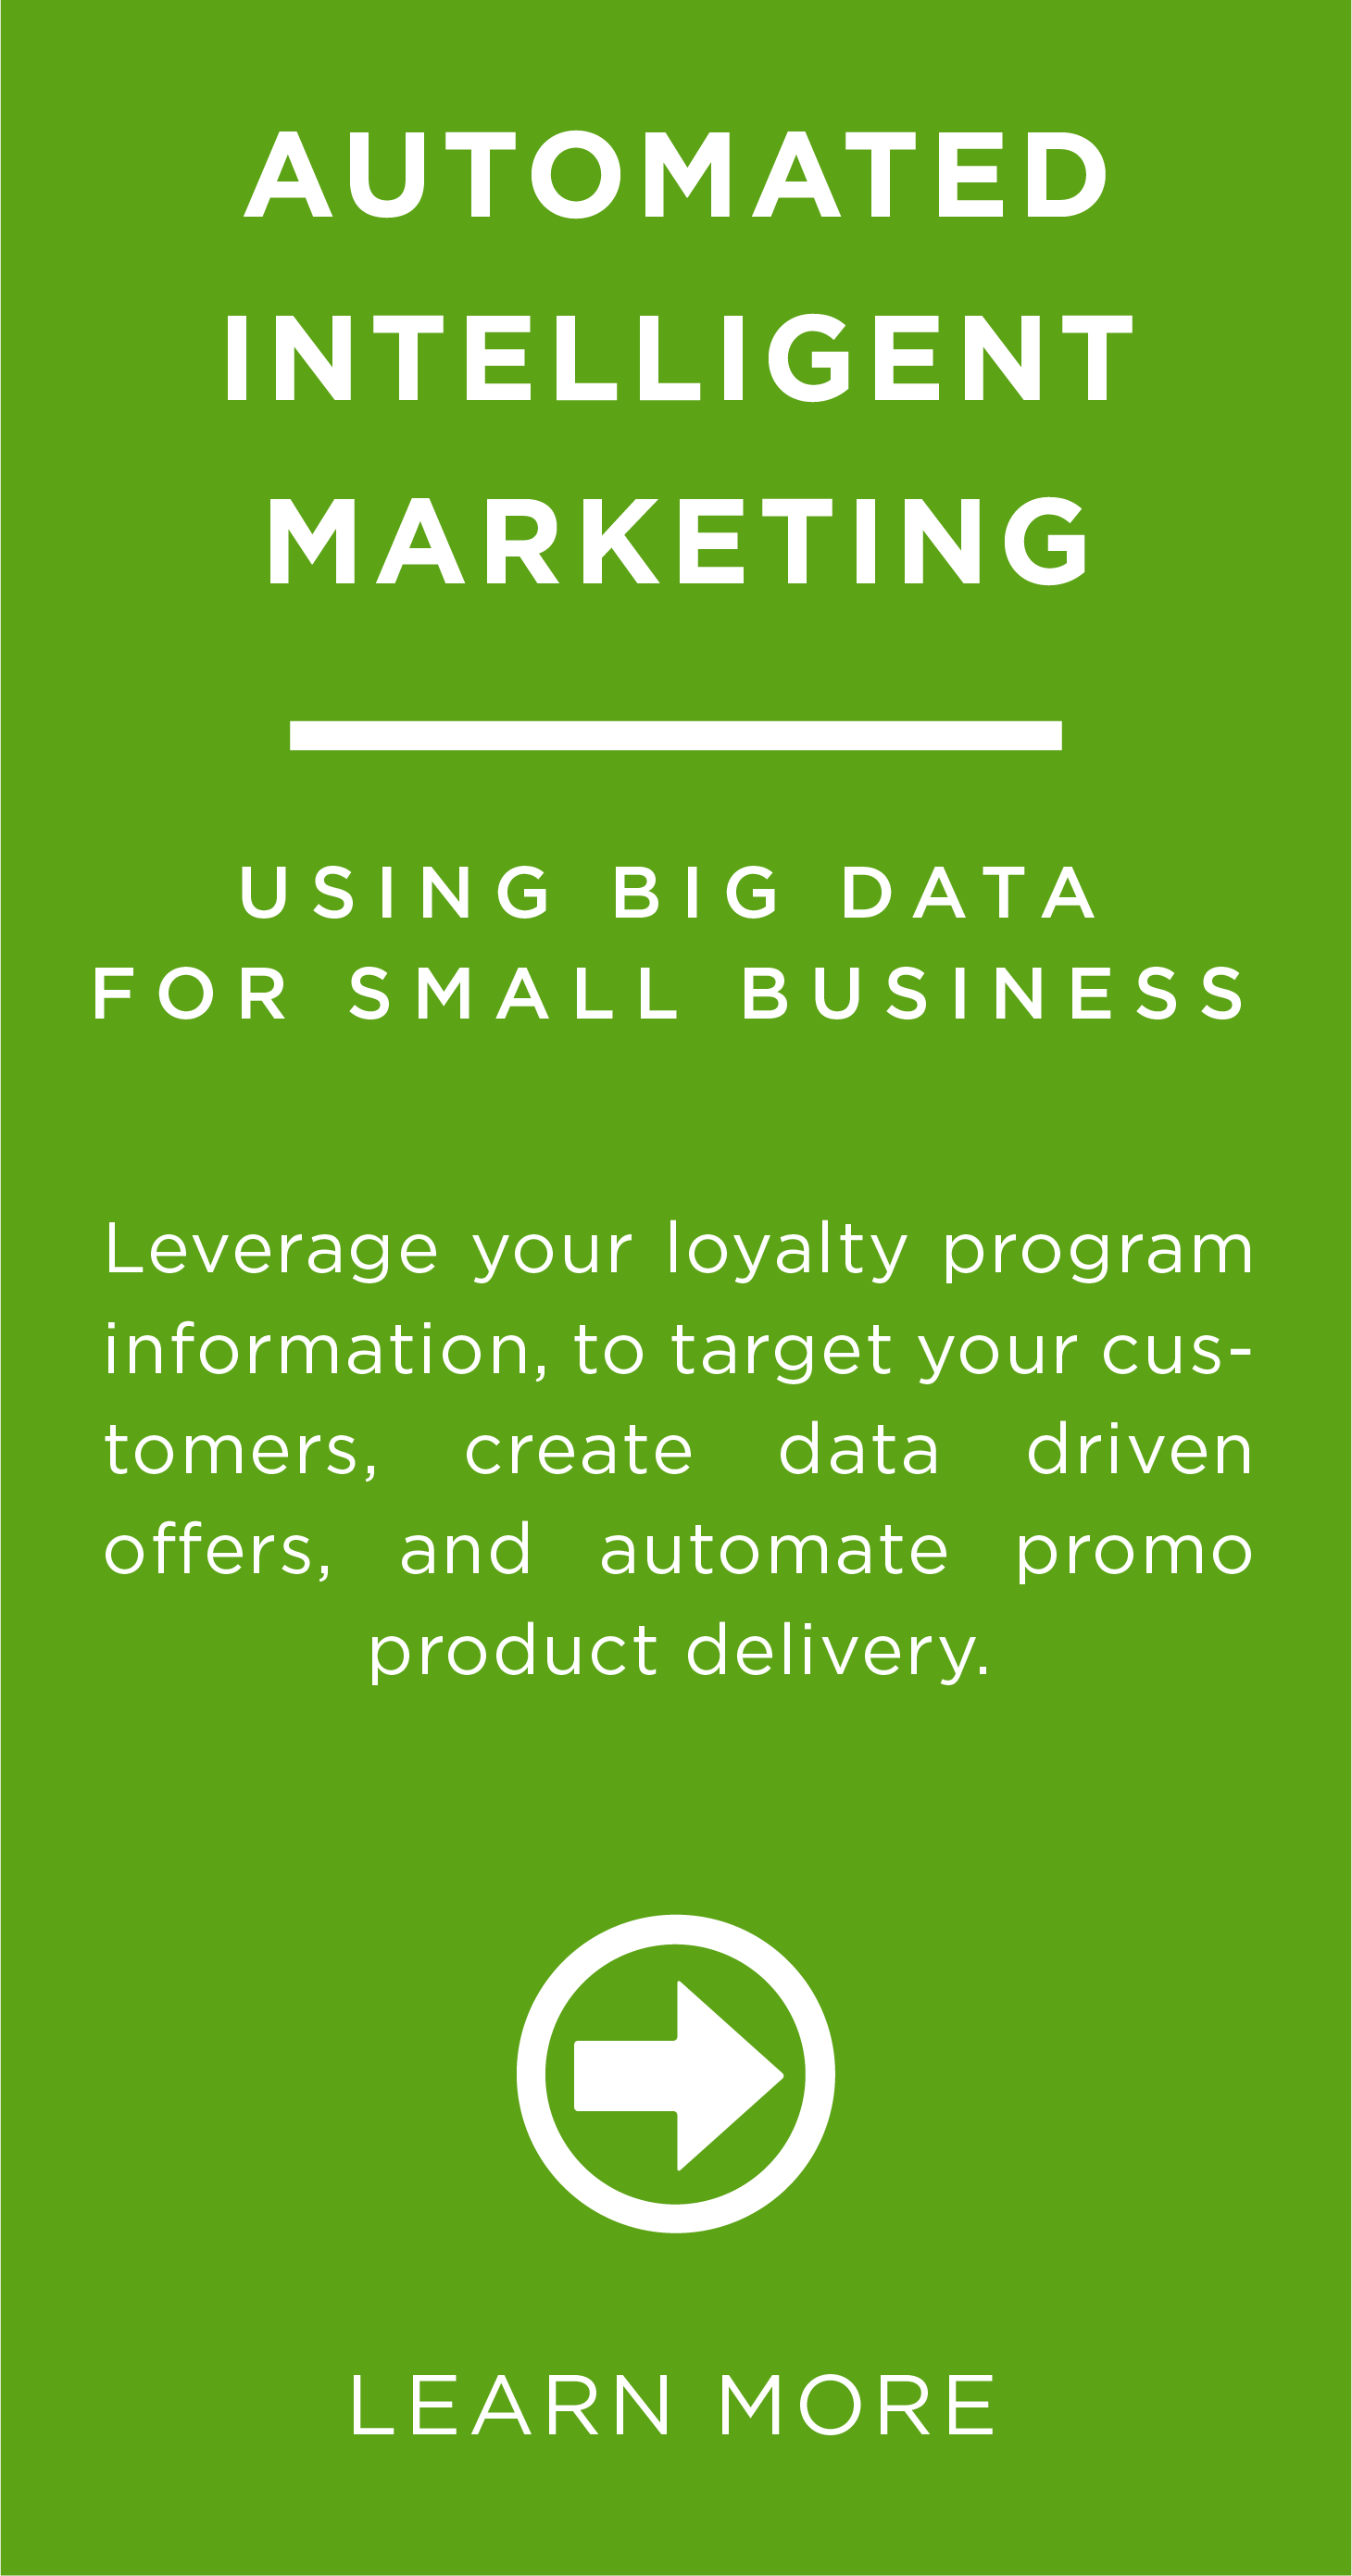 Leverage your loyalty program information to target your customers, create data driven offers, and automate promo product delivery.